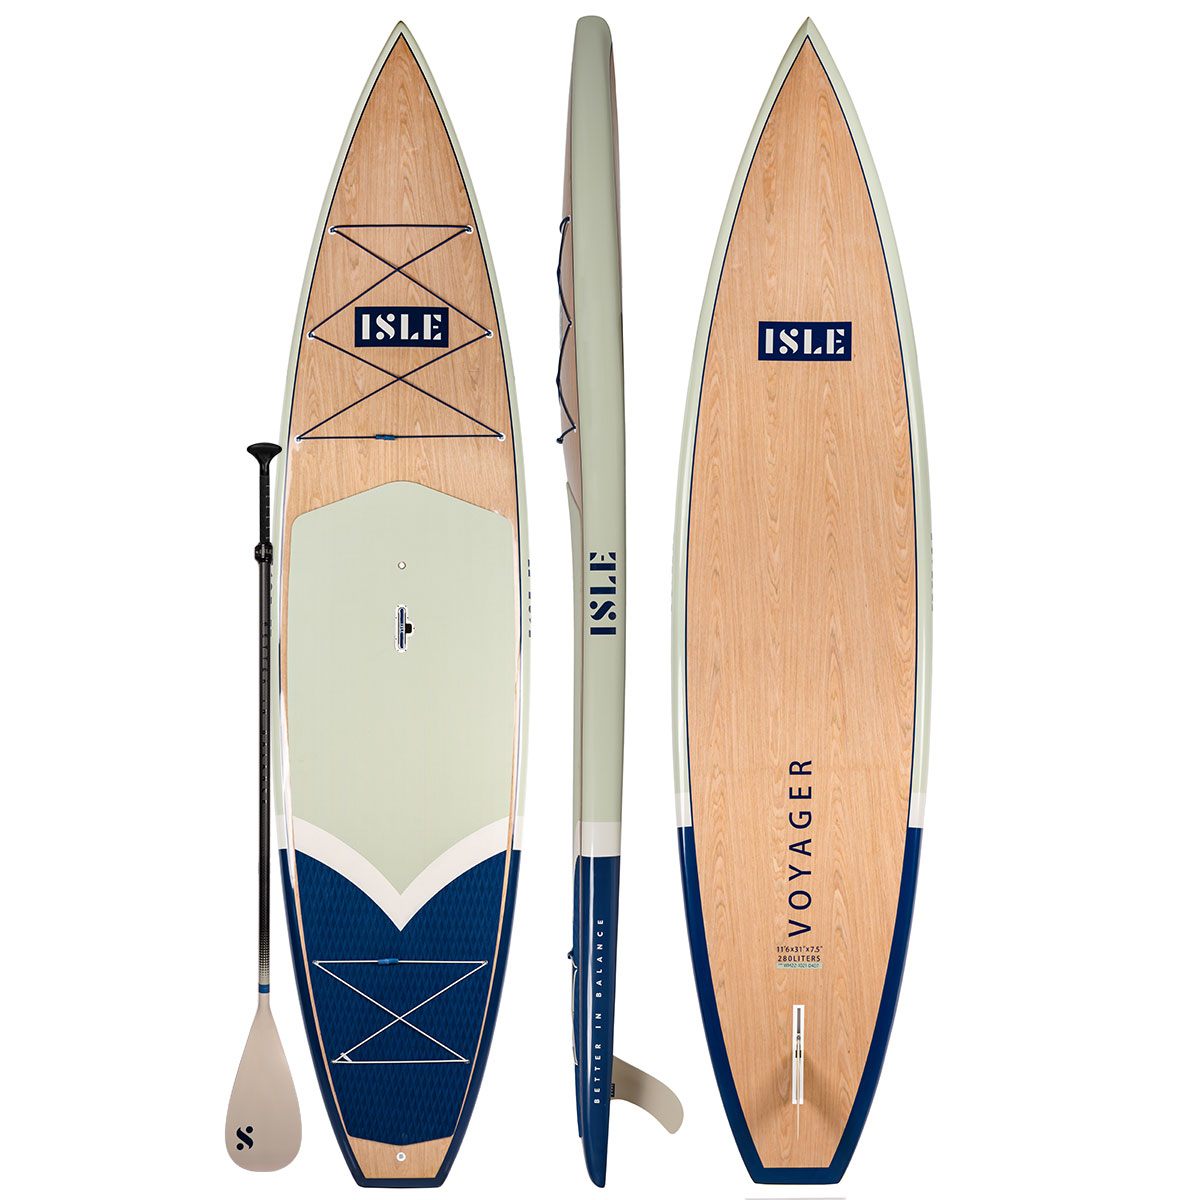 Voyager 2.0Stand Up Paddle Board PackageThis high-performing board has a premium wooden finish and a pointed nose, making it the best touring SUP we offer as it cuts through the water with ease.